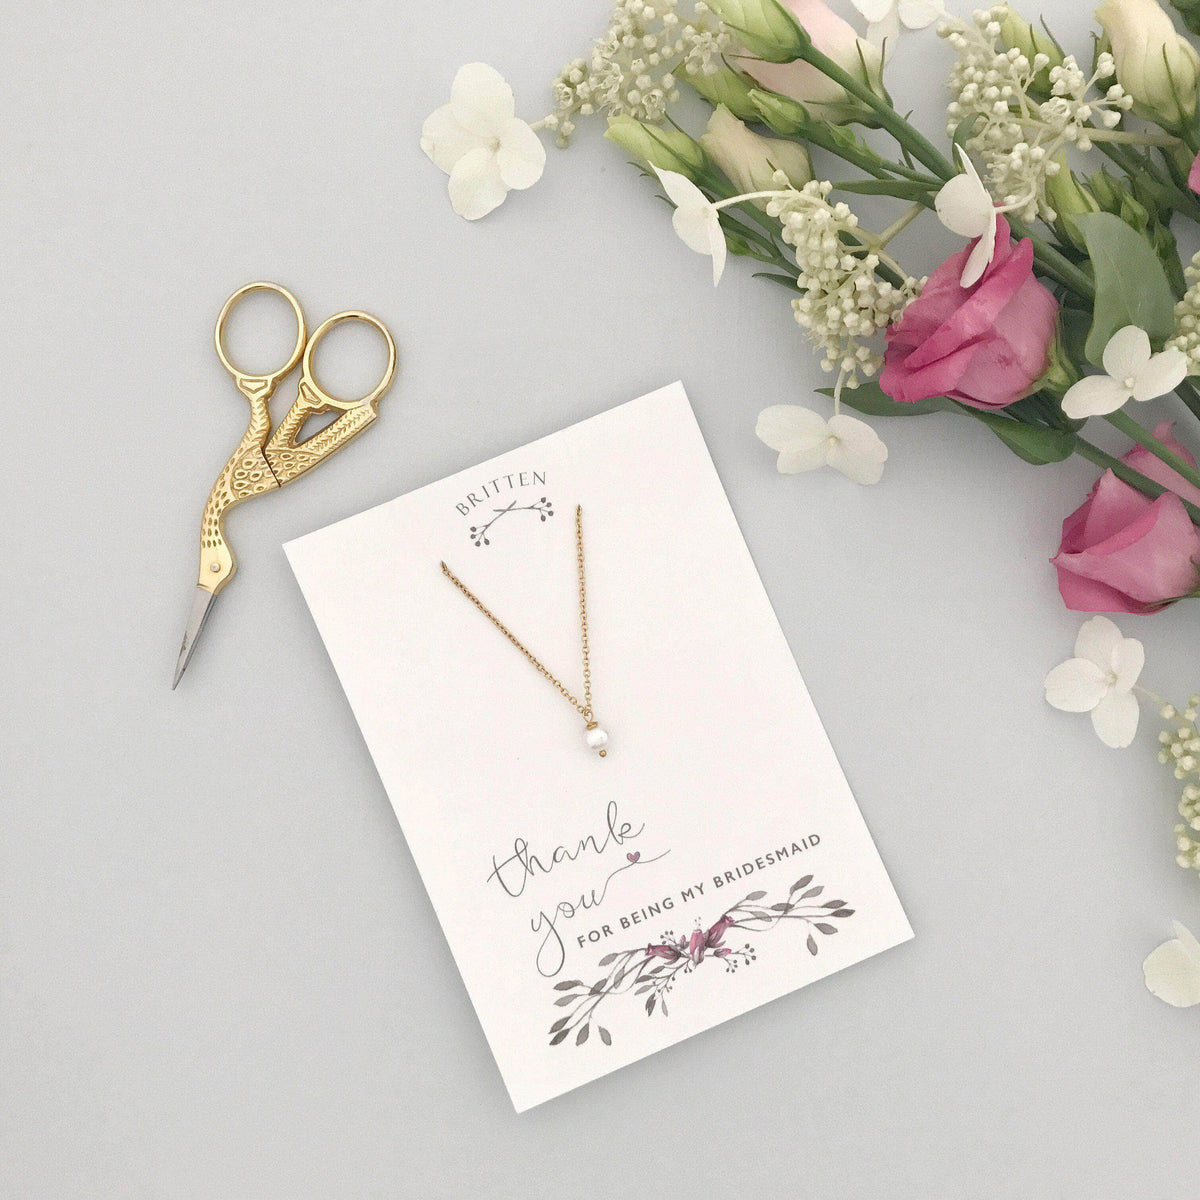 Bridesmaid Gift Gold Bridesmaid &#39;thank you&#39; gift necklace - &#39;Seville&#39; in gold